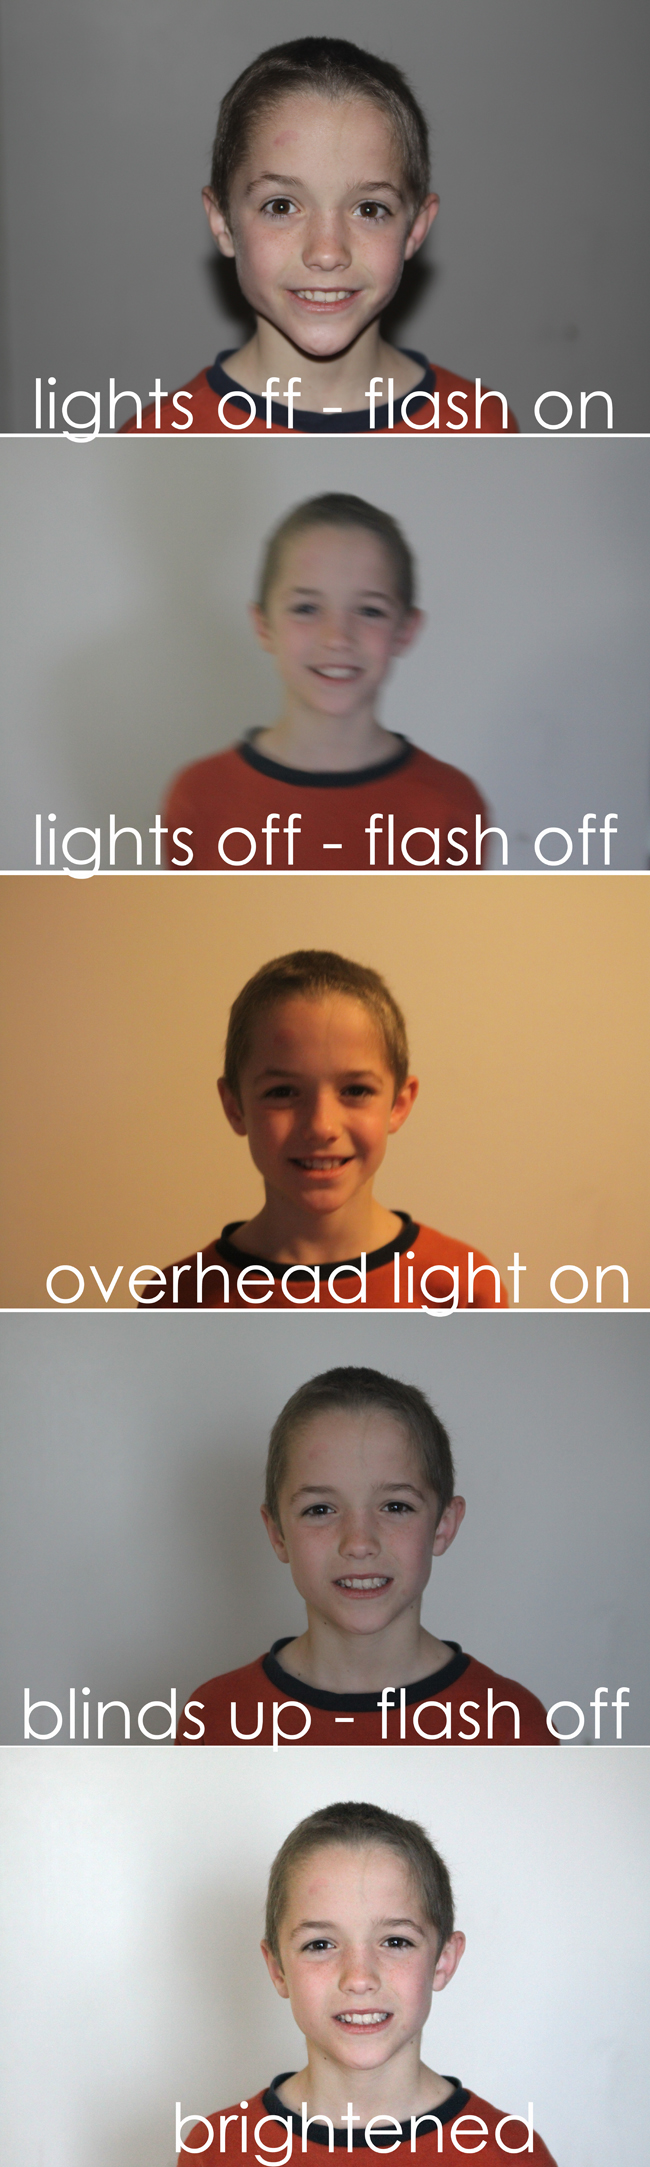 comparison photos of different lighting conditions